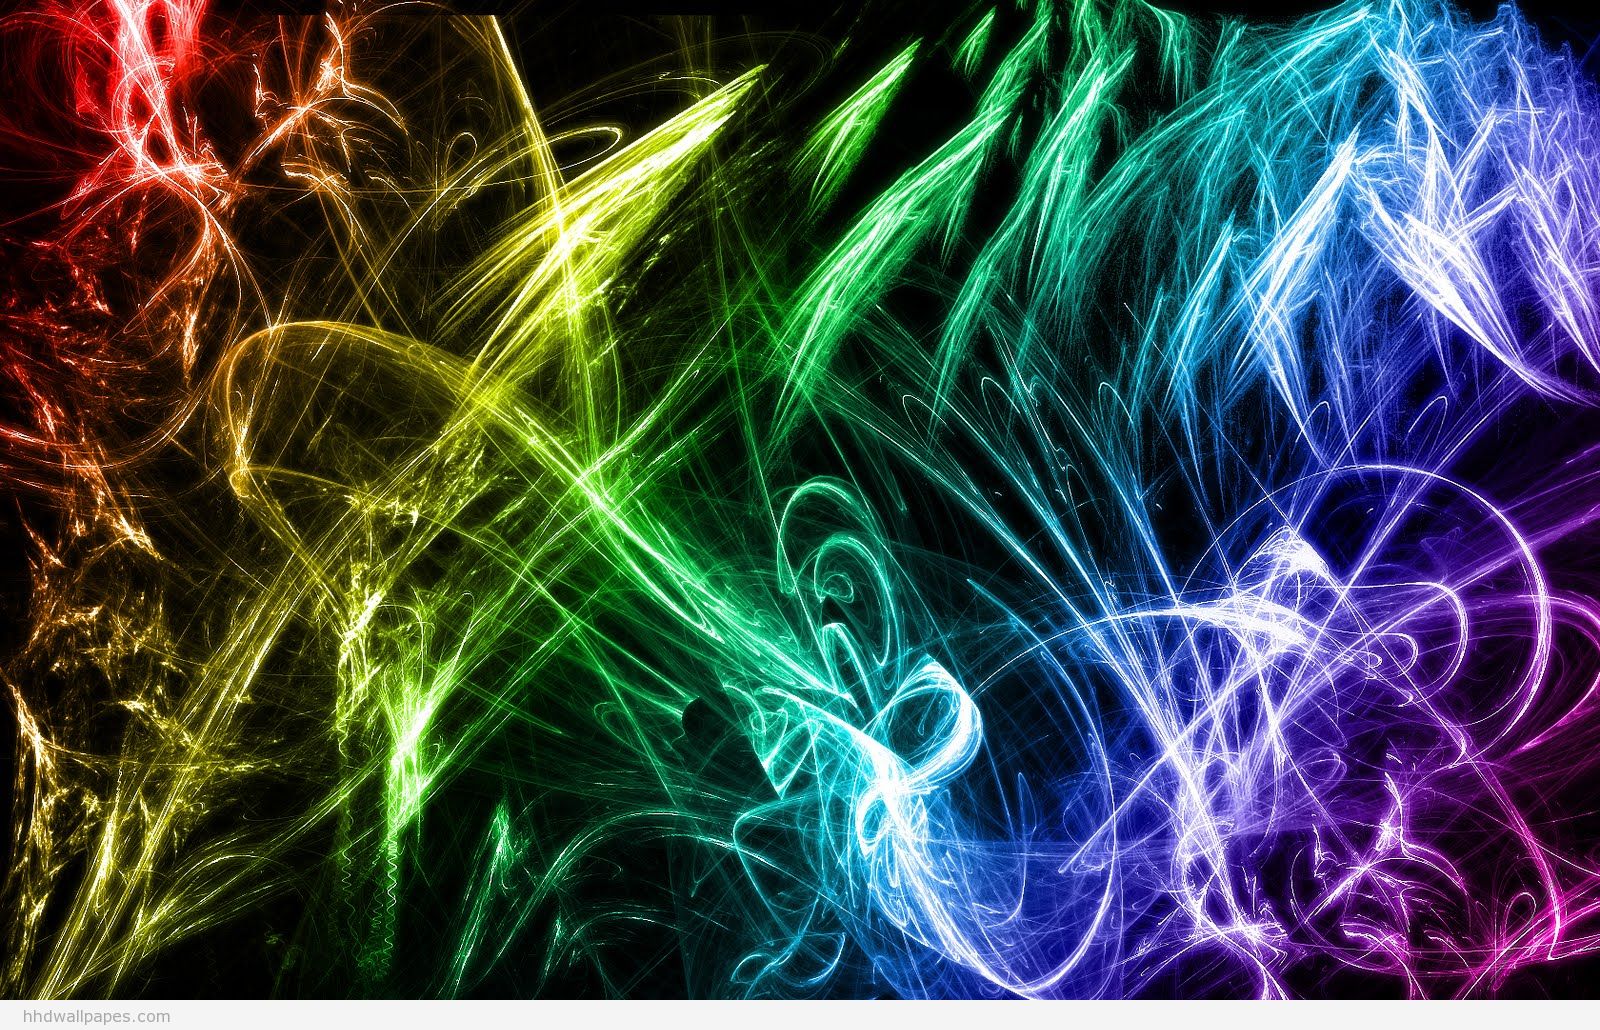 Abstract 1080p Wallpaper Which Is Under The